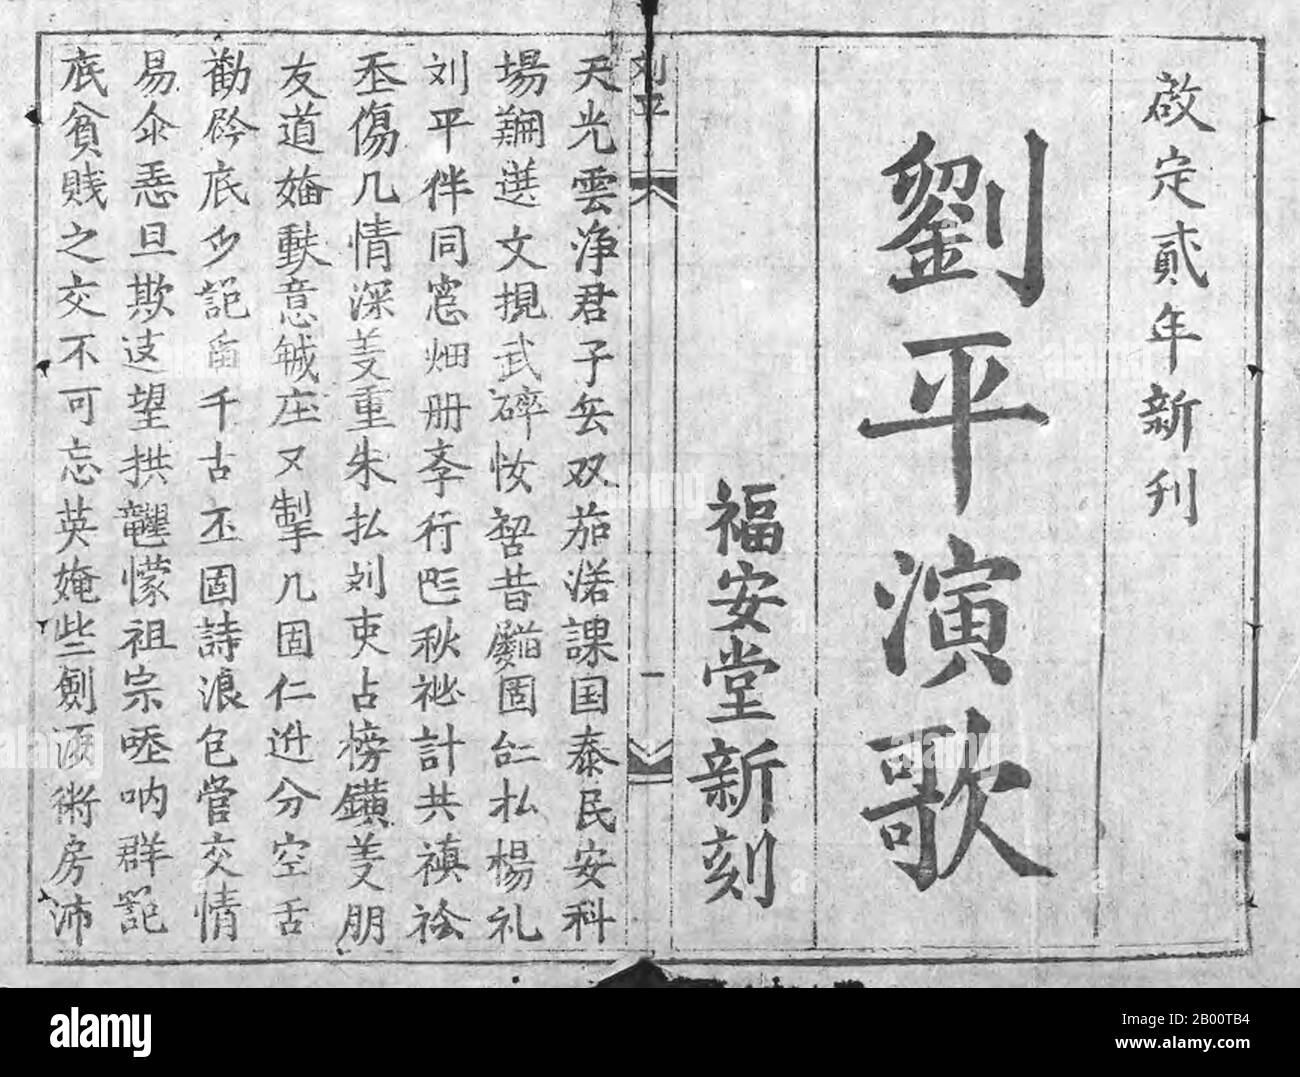 Vietnam: Title page from a 1917 edition of the Vietnamese classic 'Luu Binh dien ca', printed in Han-Nom.  The work is a classical drama telling the story of two close friends, Luu Binh and Duong Le. Chu Nom is an obsolete writing system of the Vietnamese language. It makes use of Chinese characters (known as Han Tu in Vietnamese), and characters coined following the Chinese model. The earliest known example of Chu Nom dates to the 13th century. It was used almost exclusively by the Vietnamese elite, mostly for recording Vietnamese literature. Stock Photo